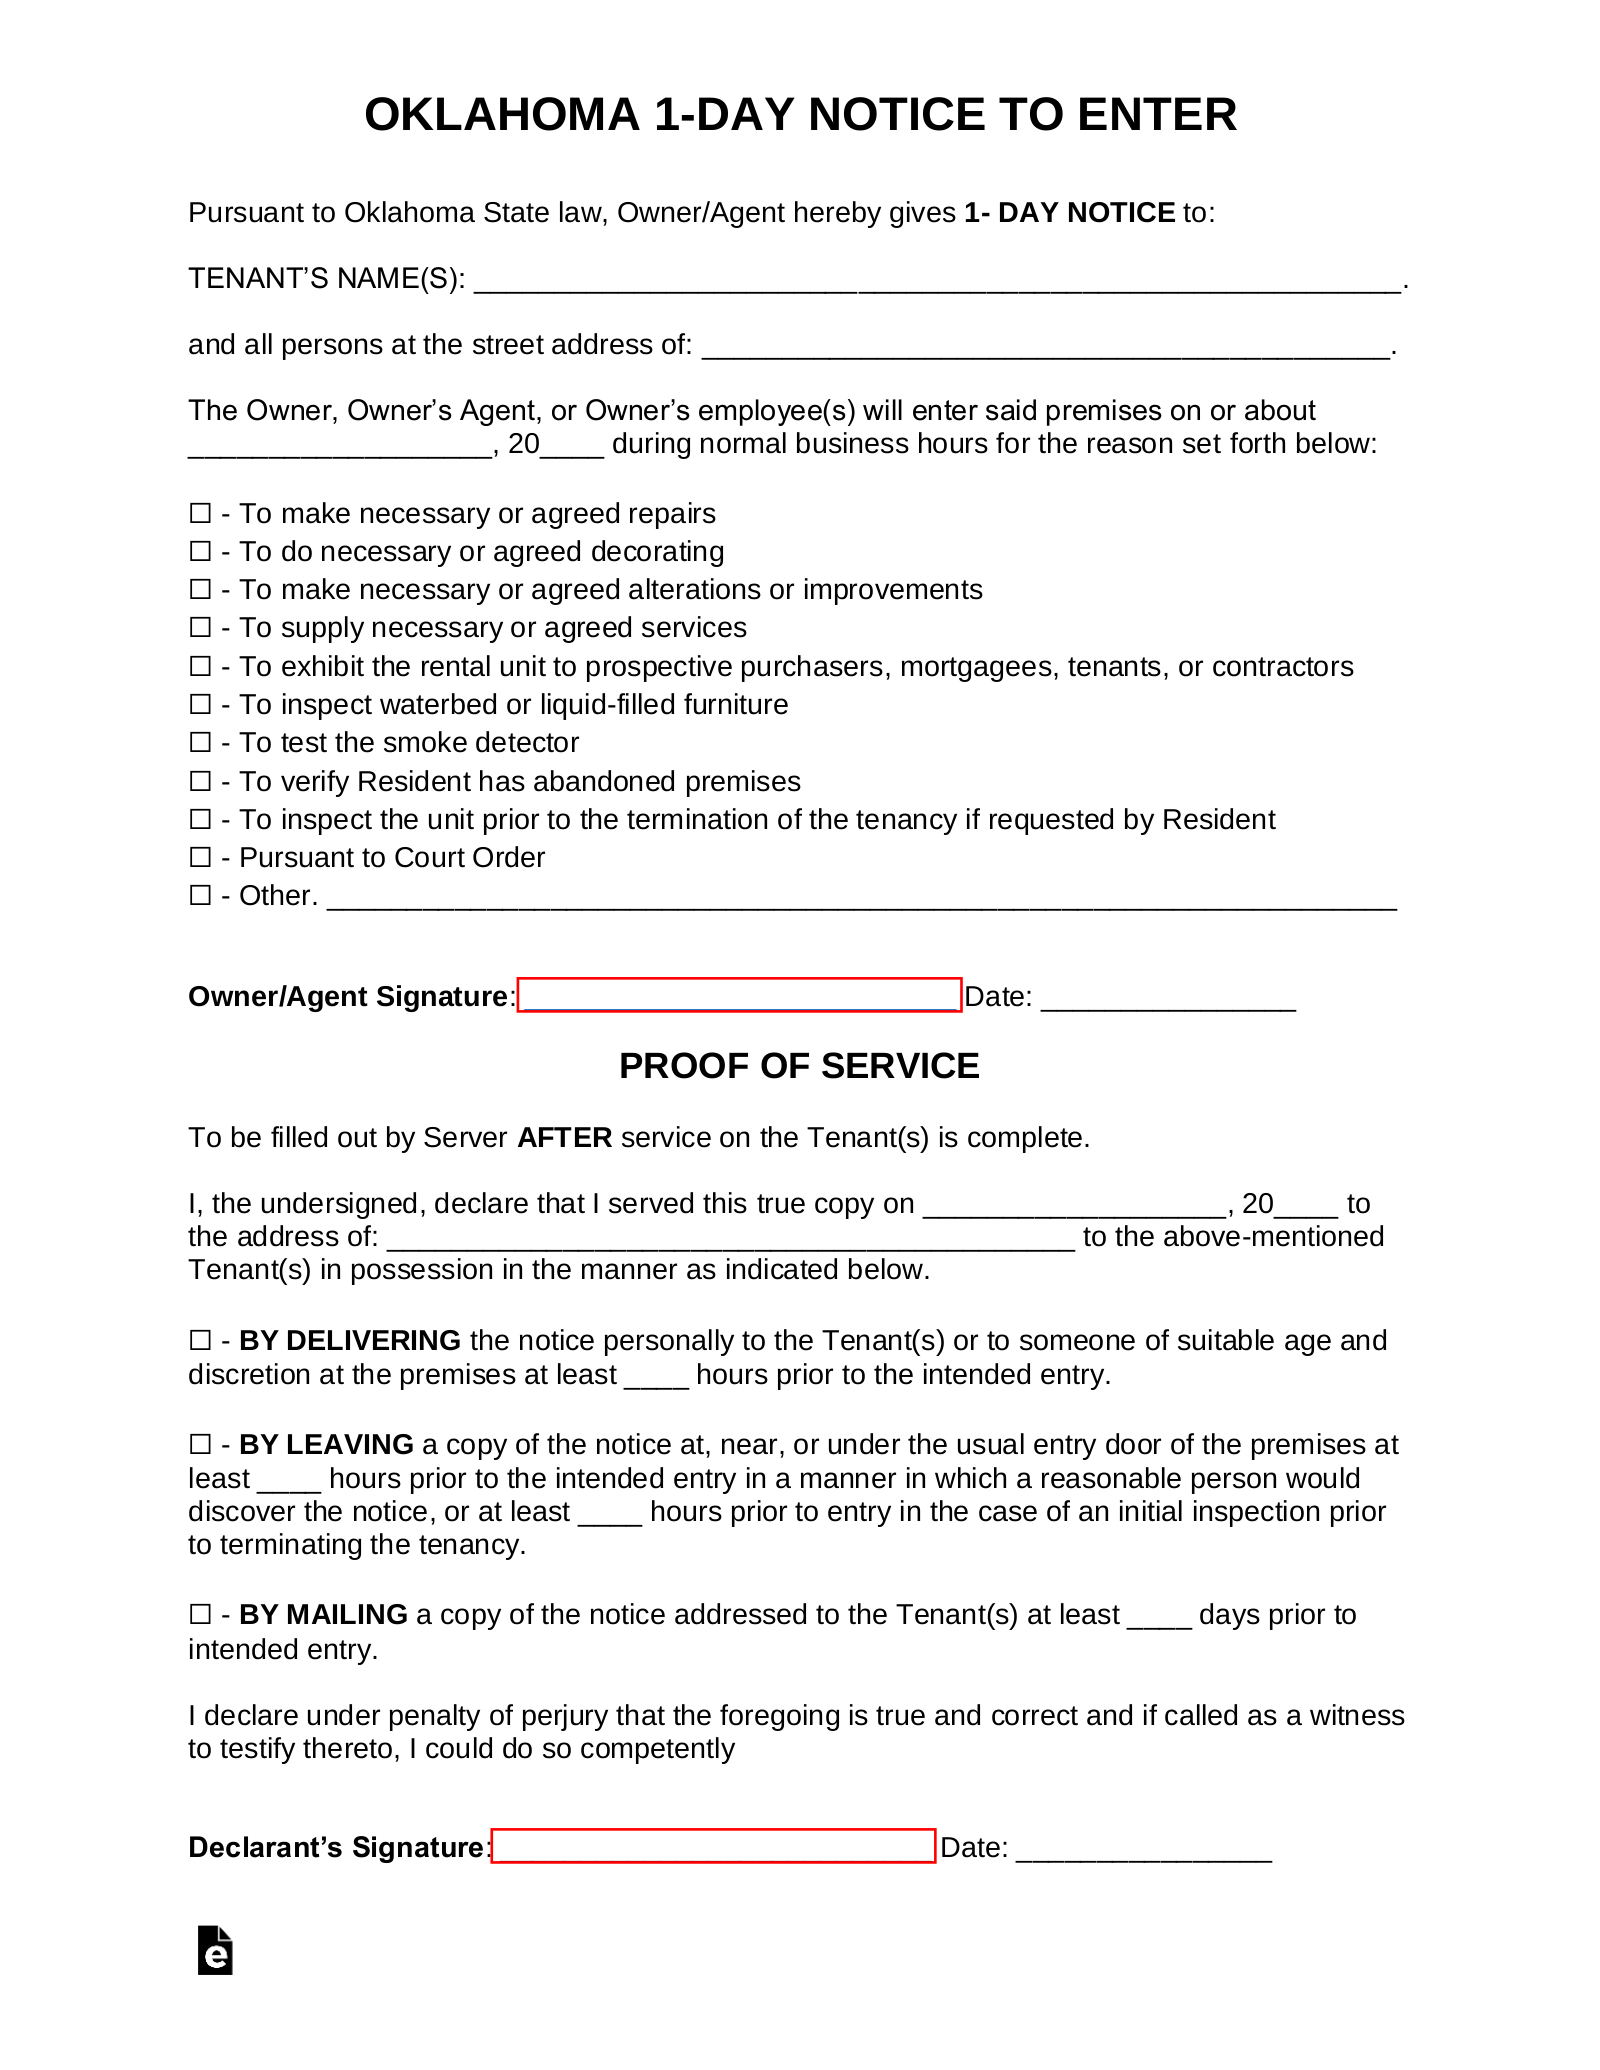 Oklahoma 1-Day Landlord Notice to Enter Form